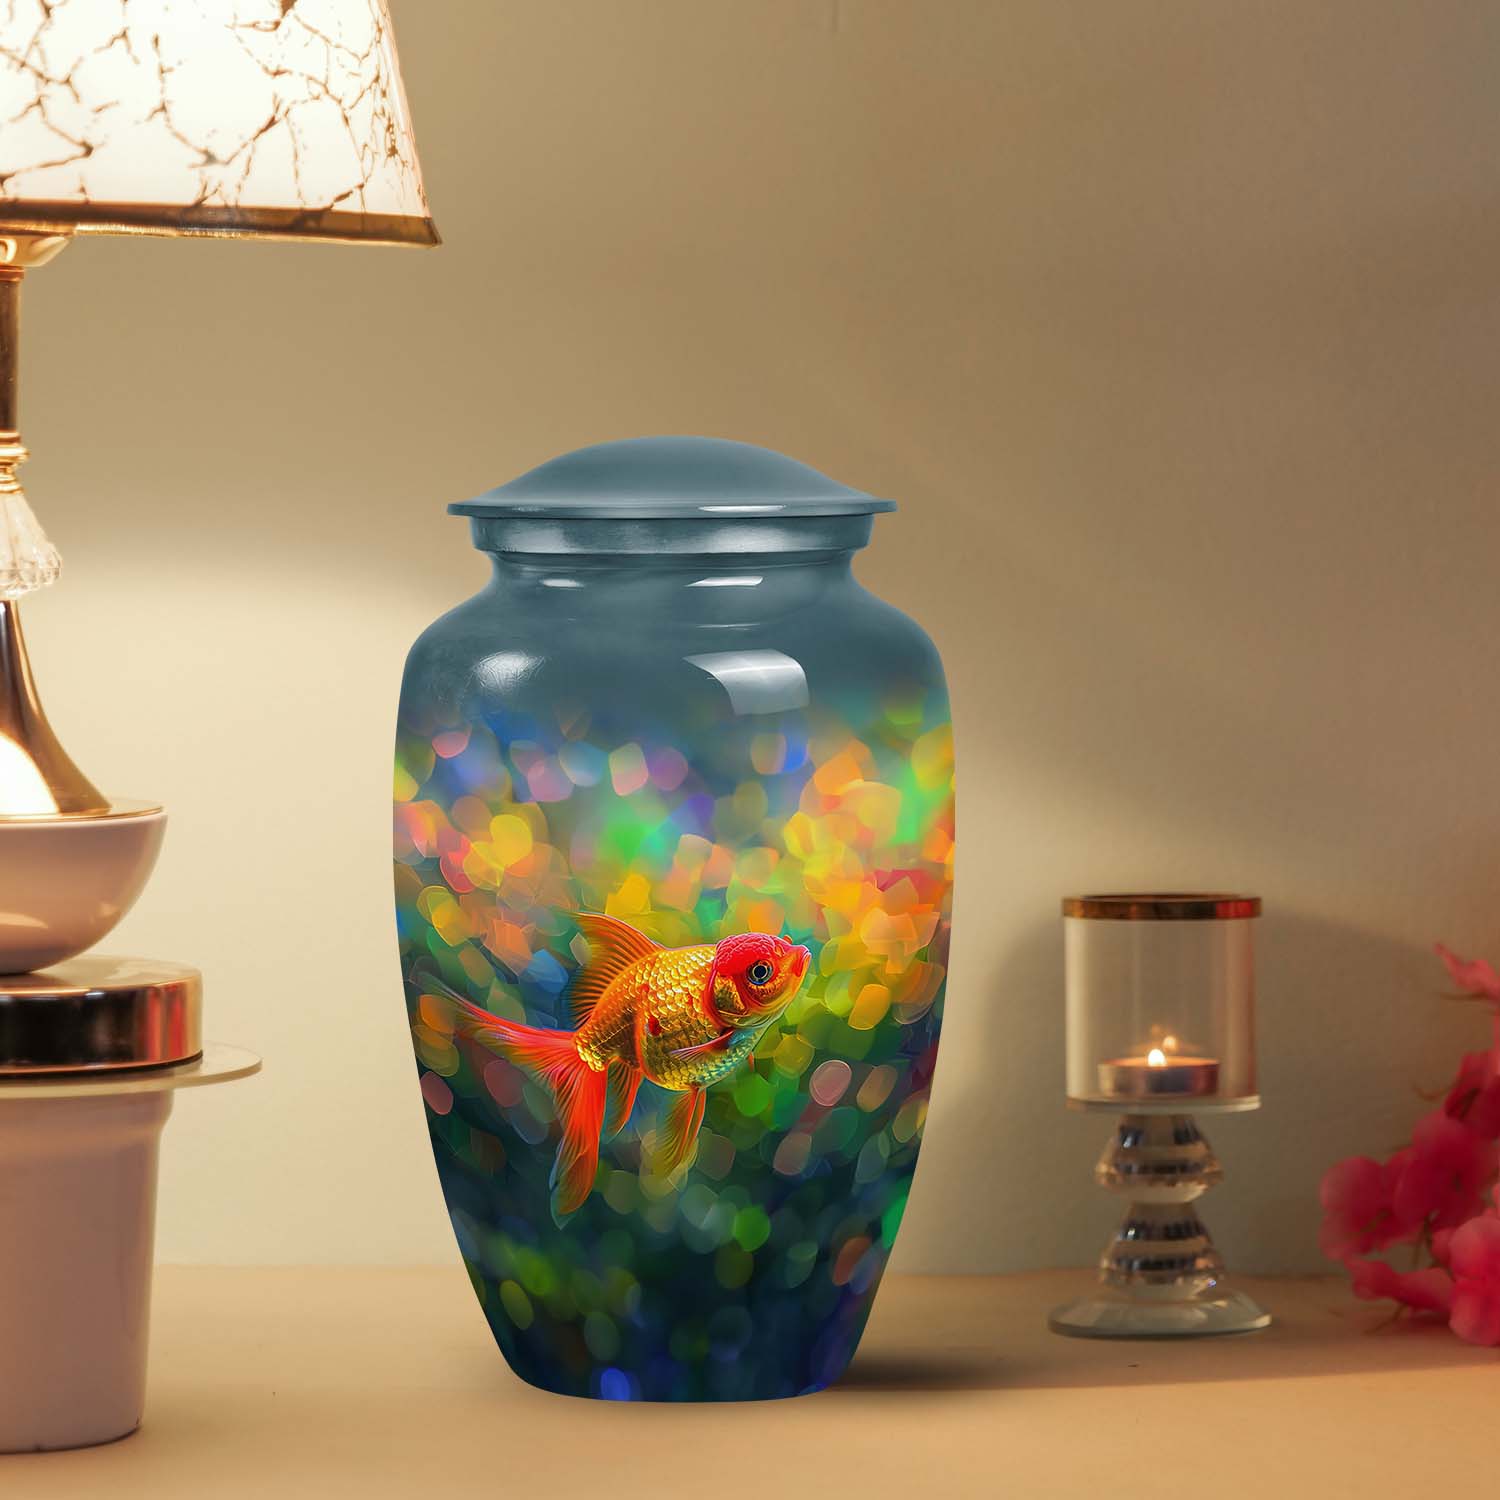 A large-sized Fish Underwater themed urn, suitable for cremation purposes